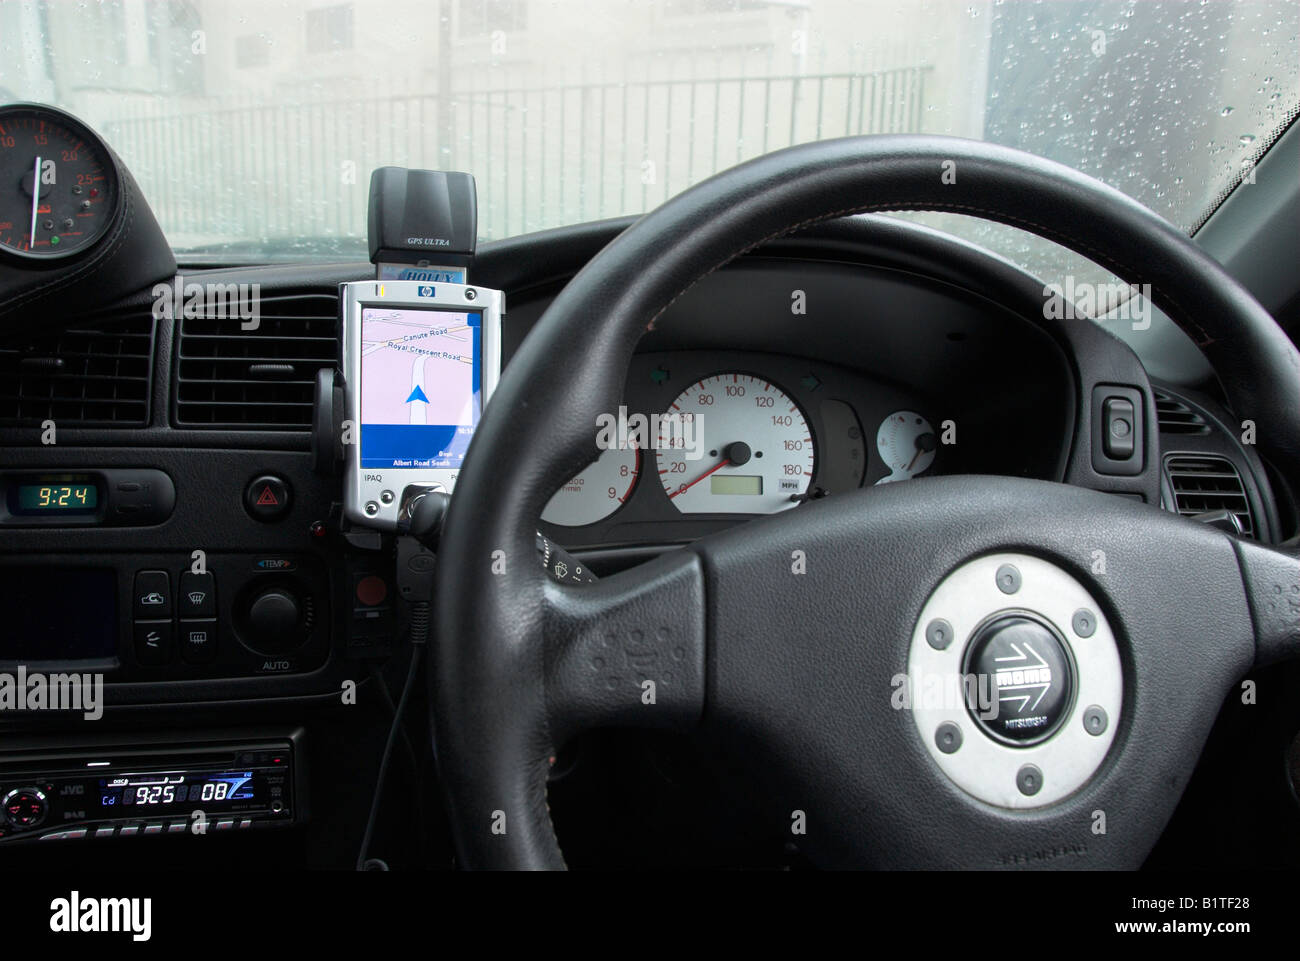 Car With a PDA Sat Nav on the Dashboard Stock Photo